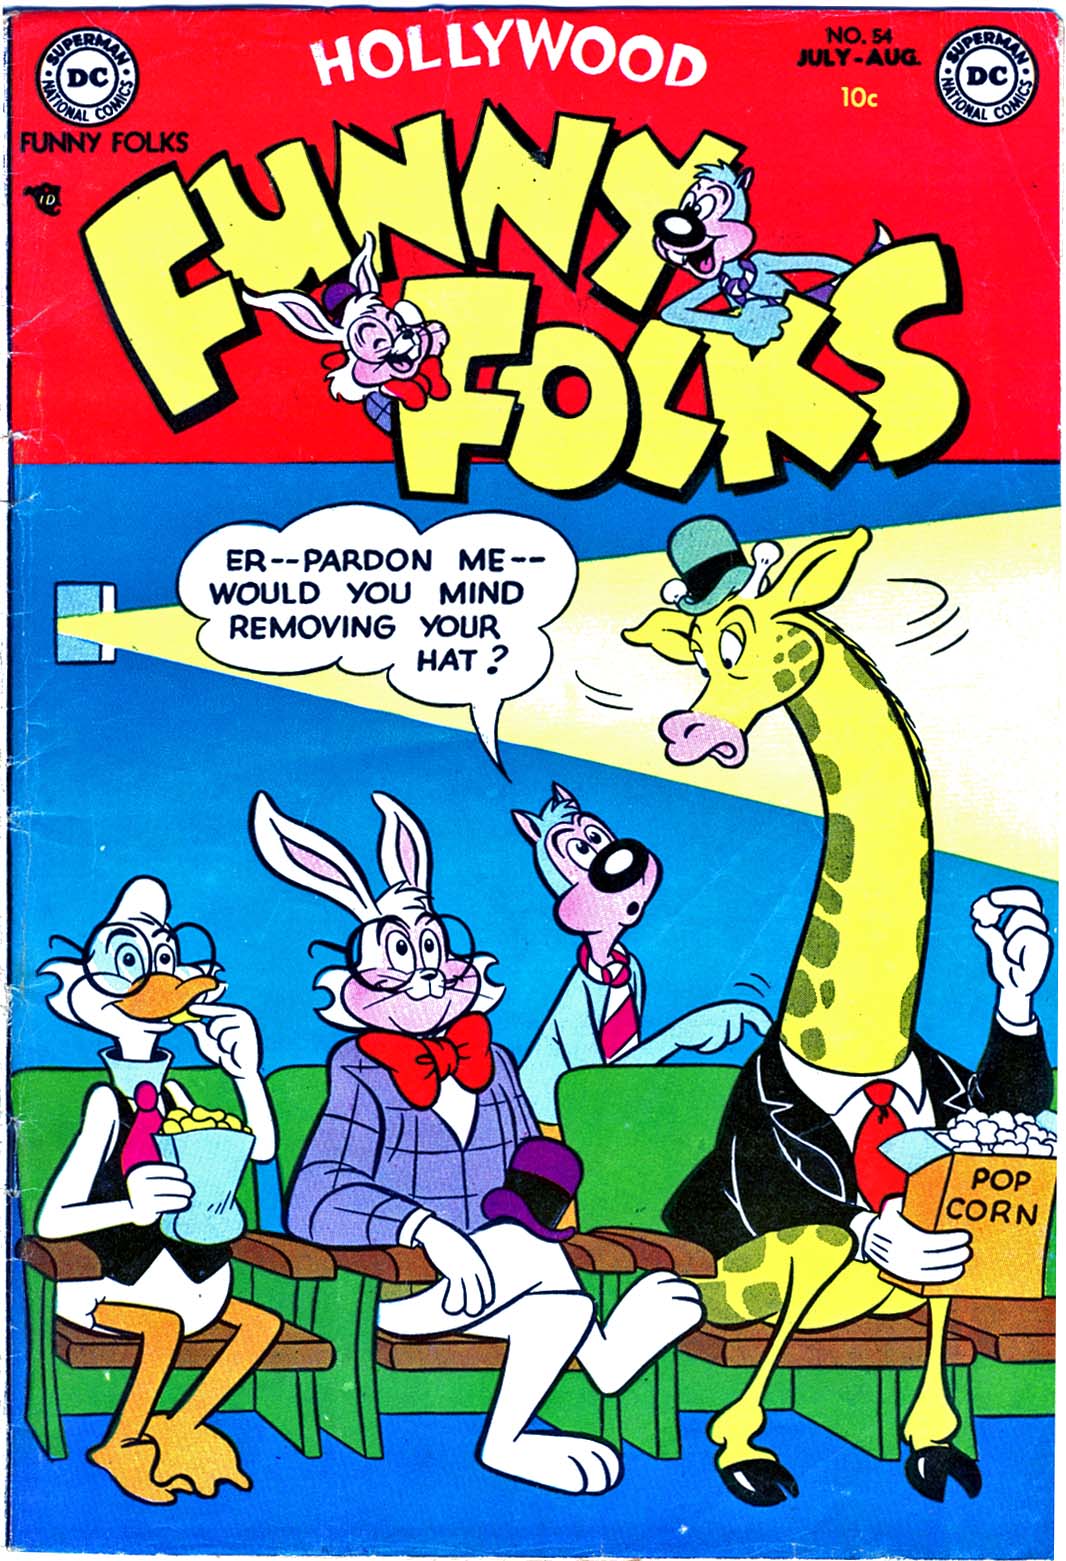 Read online Hollywood Funny Folks comic -  Issue #54 - 1